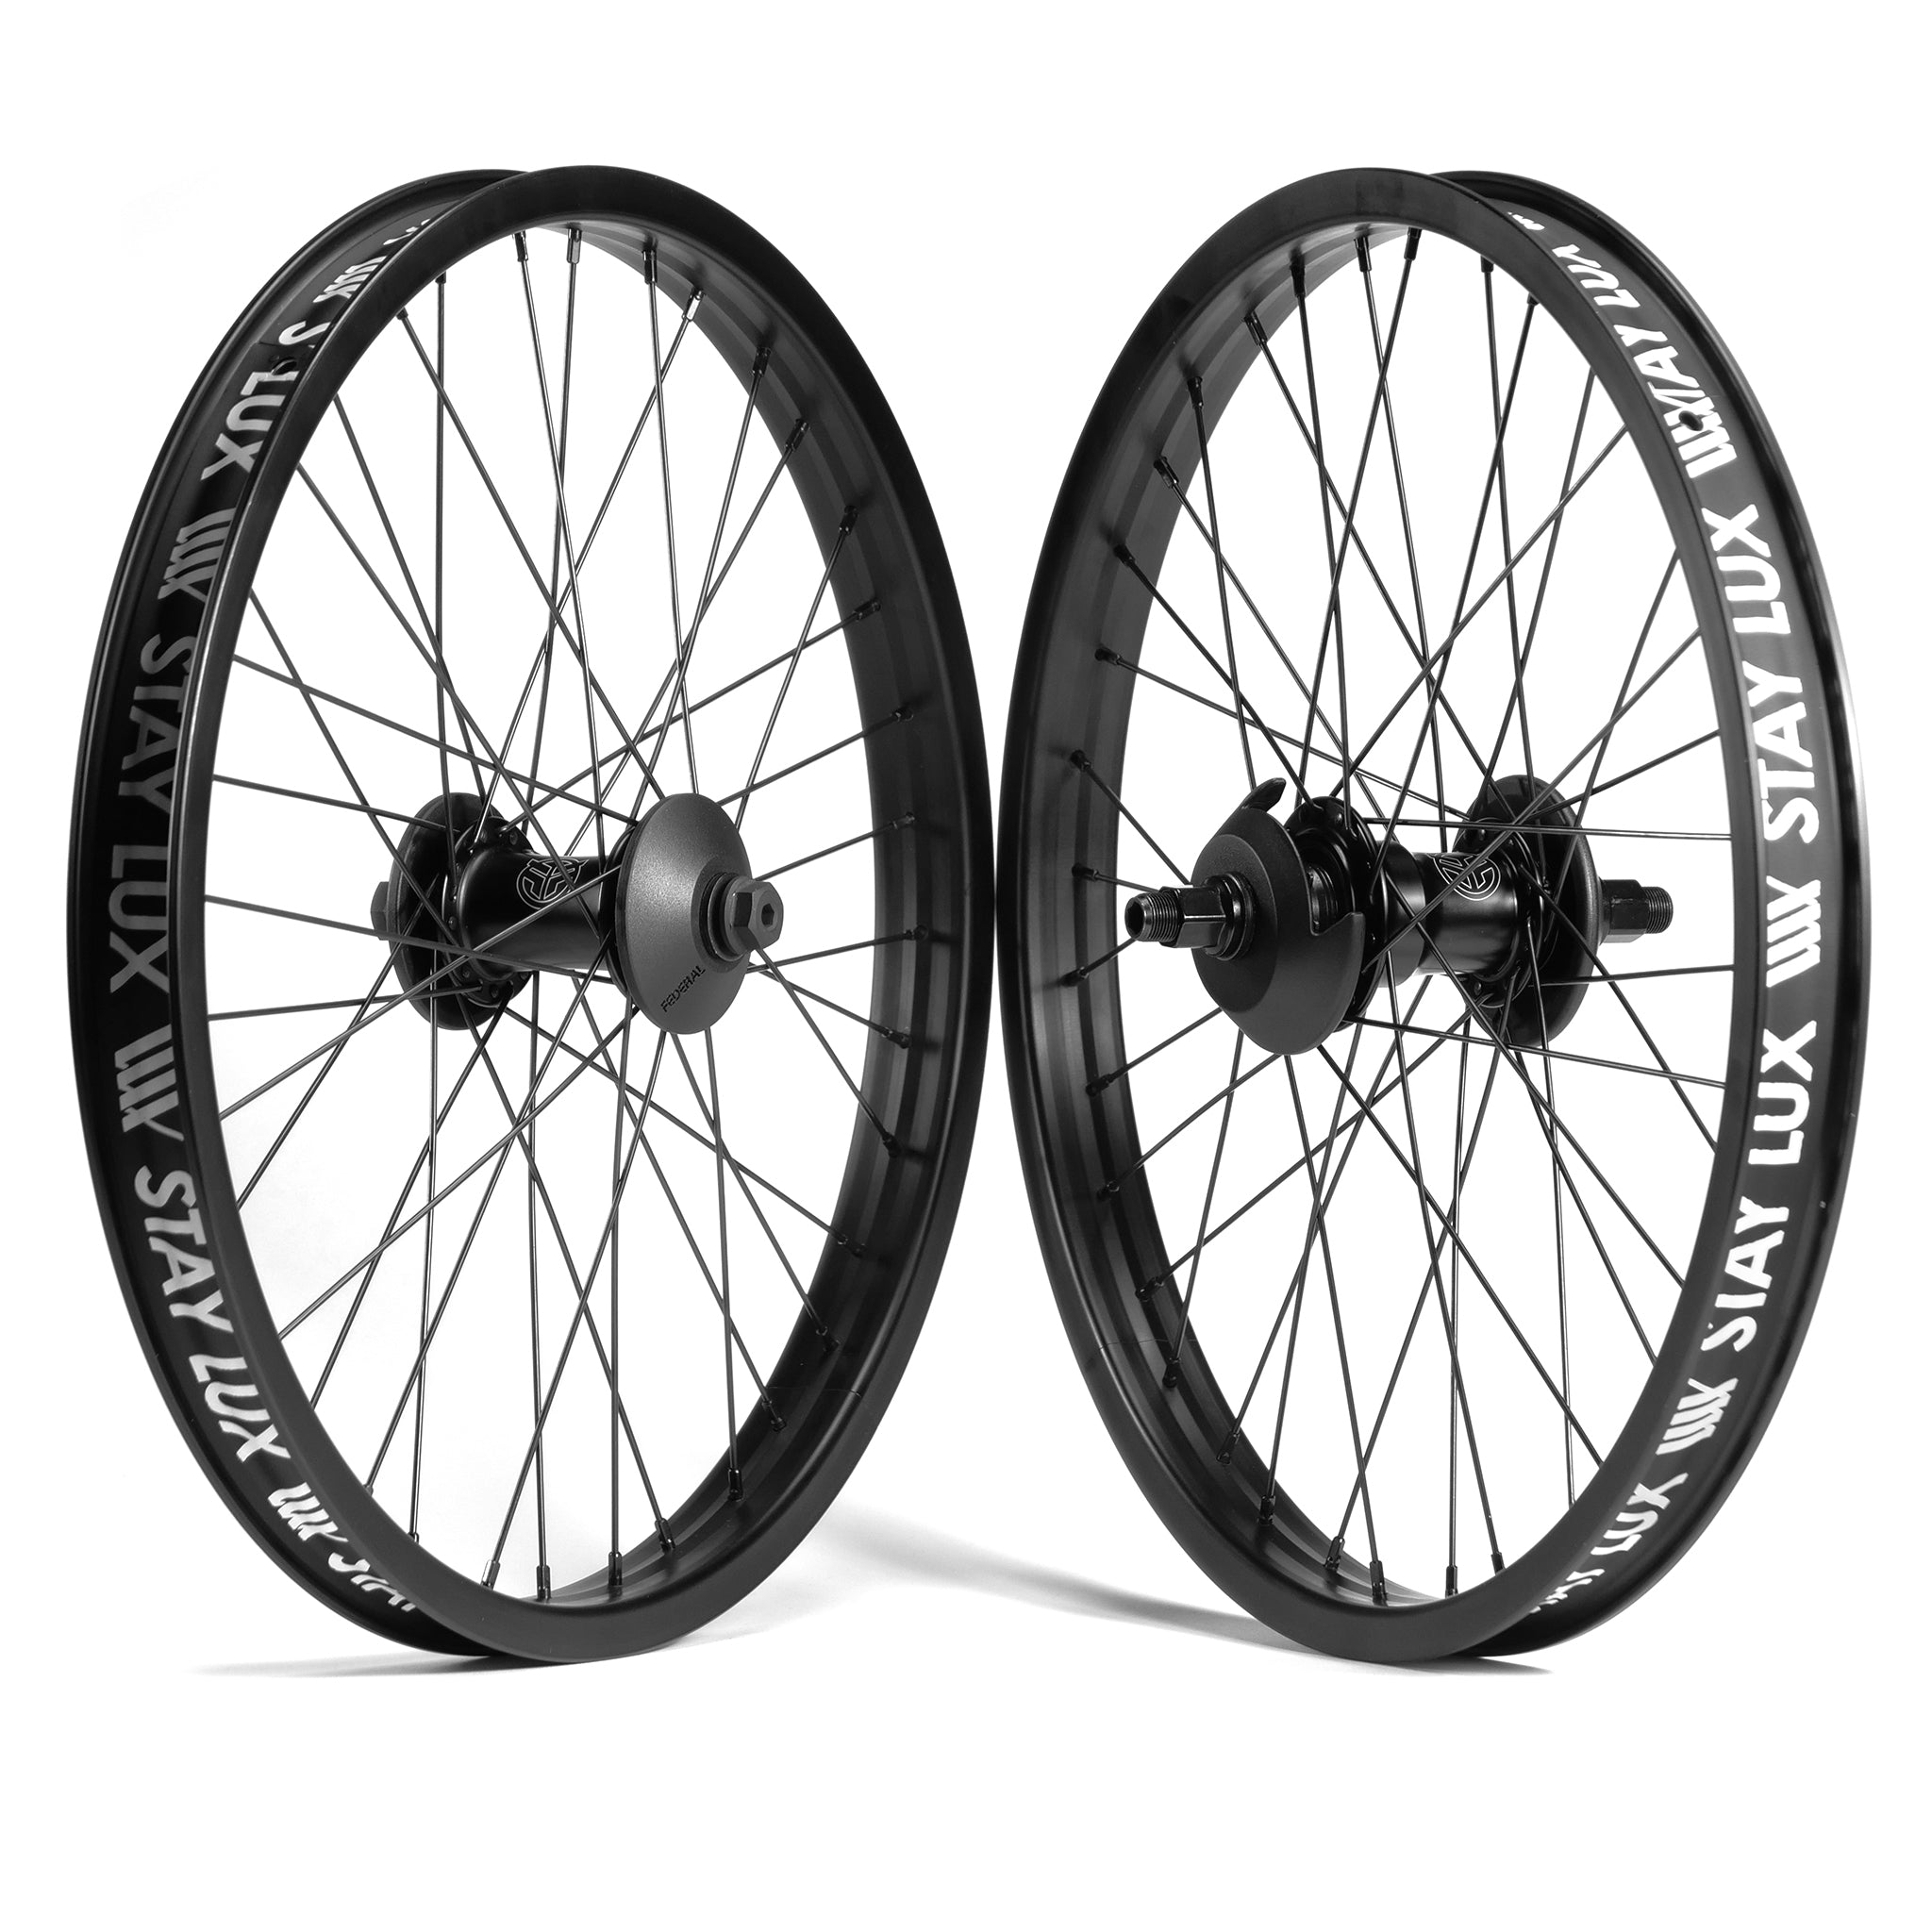 Two black bicycle wheels standing upright, featuring black spokes and printed with the text "STAY LUX" on the rims. These Federal Motion x Odyssey Stage 2 Custom Wheelsets are positioned against a white background.